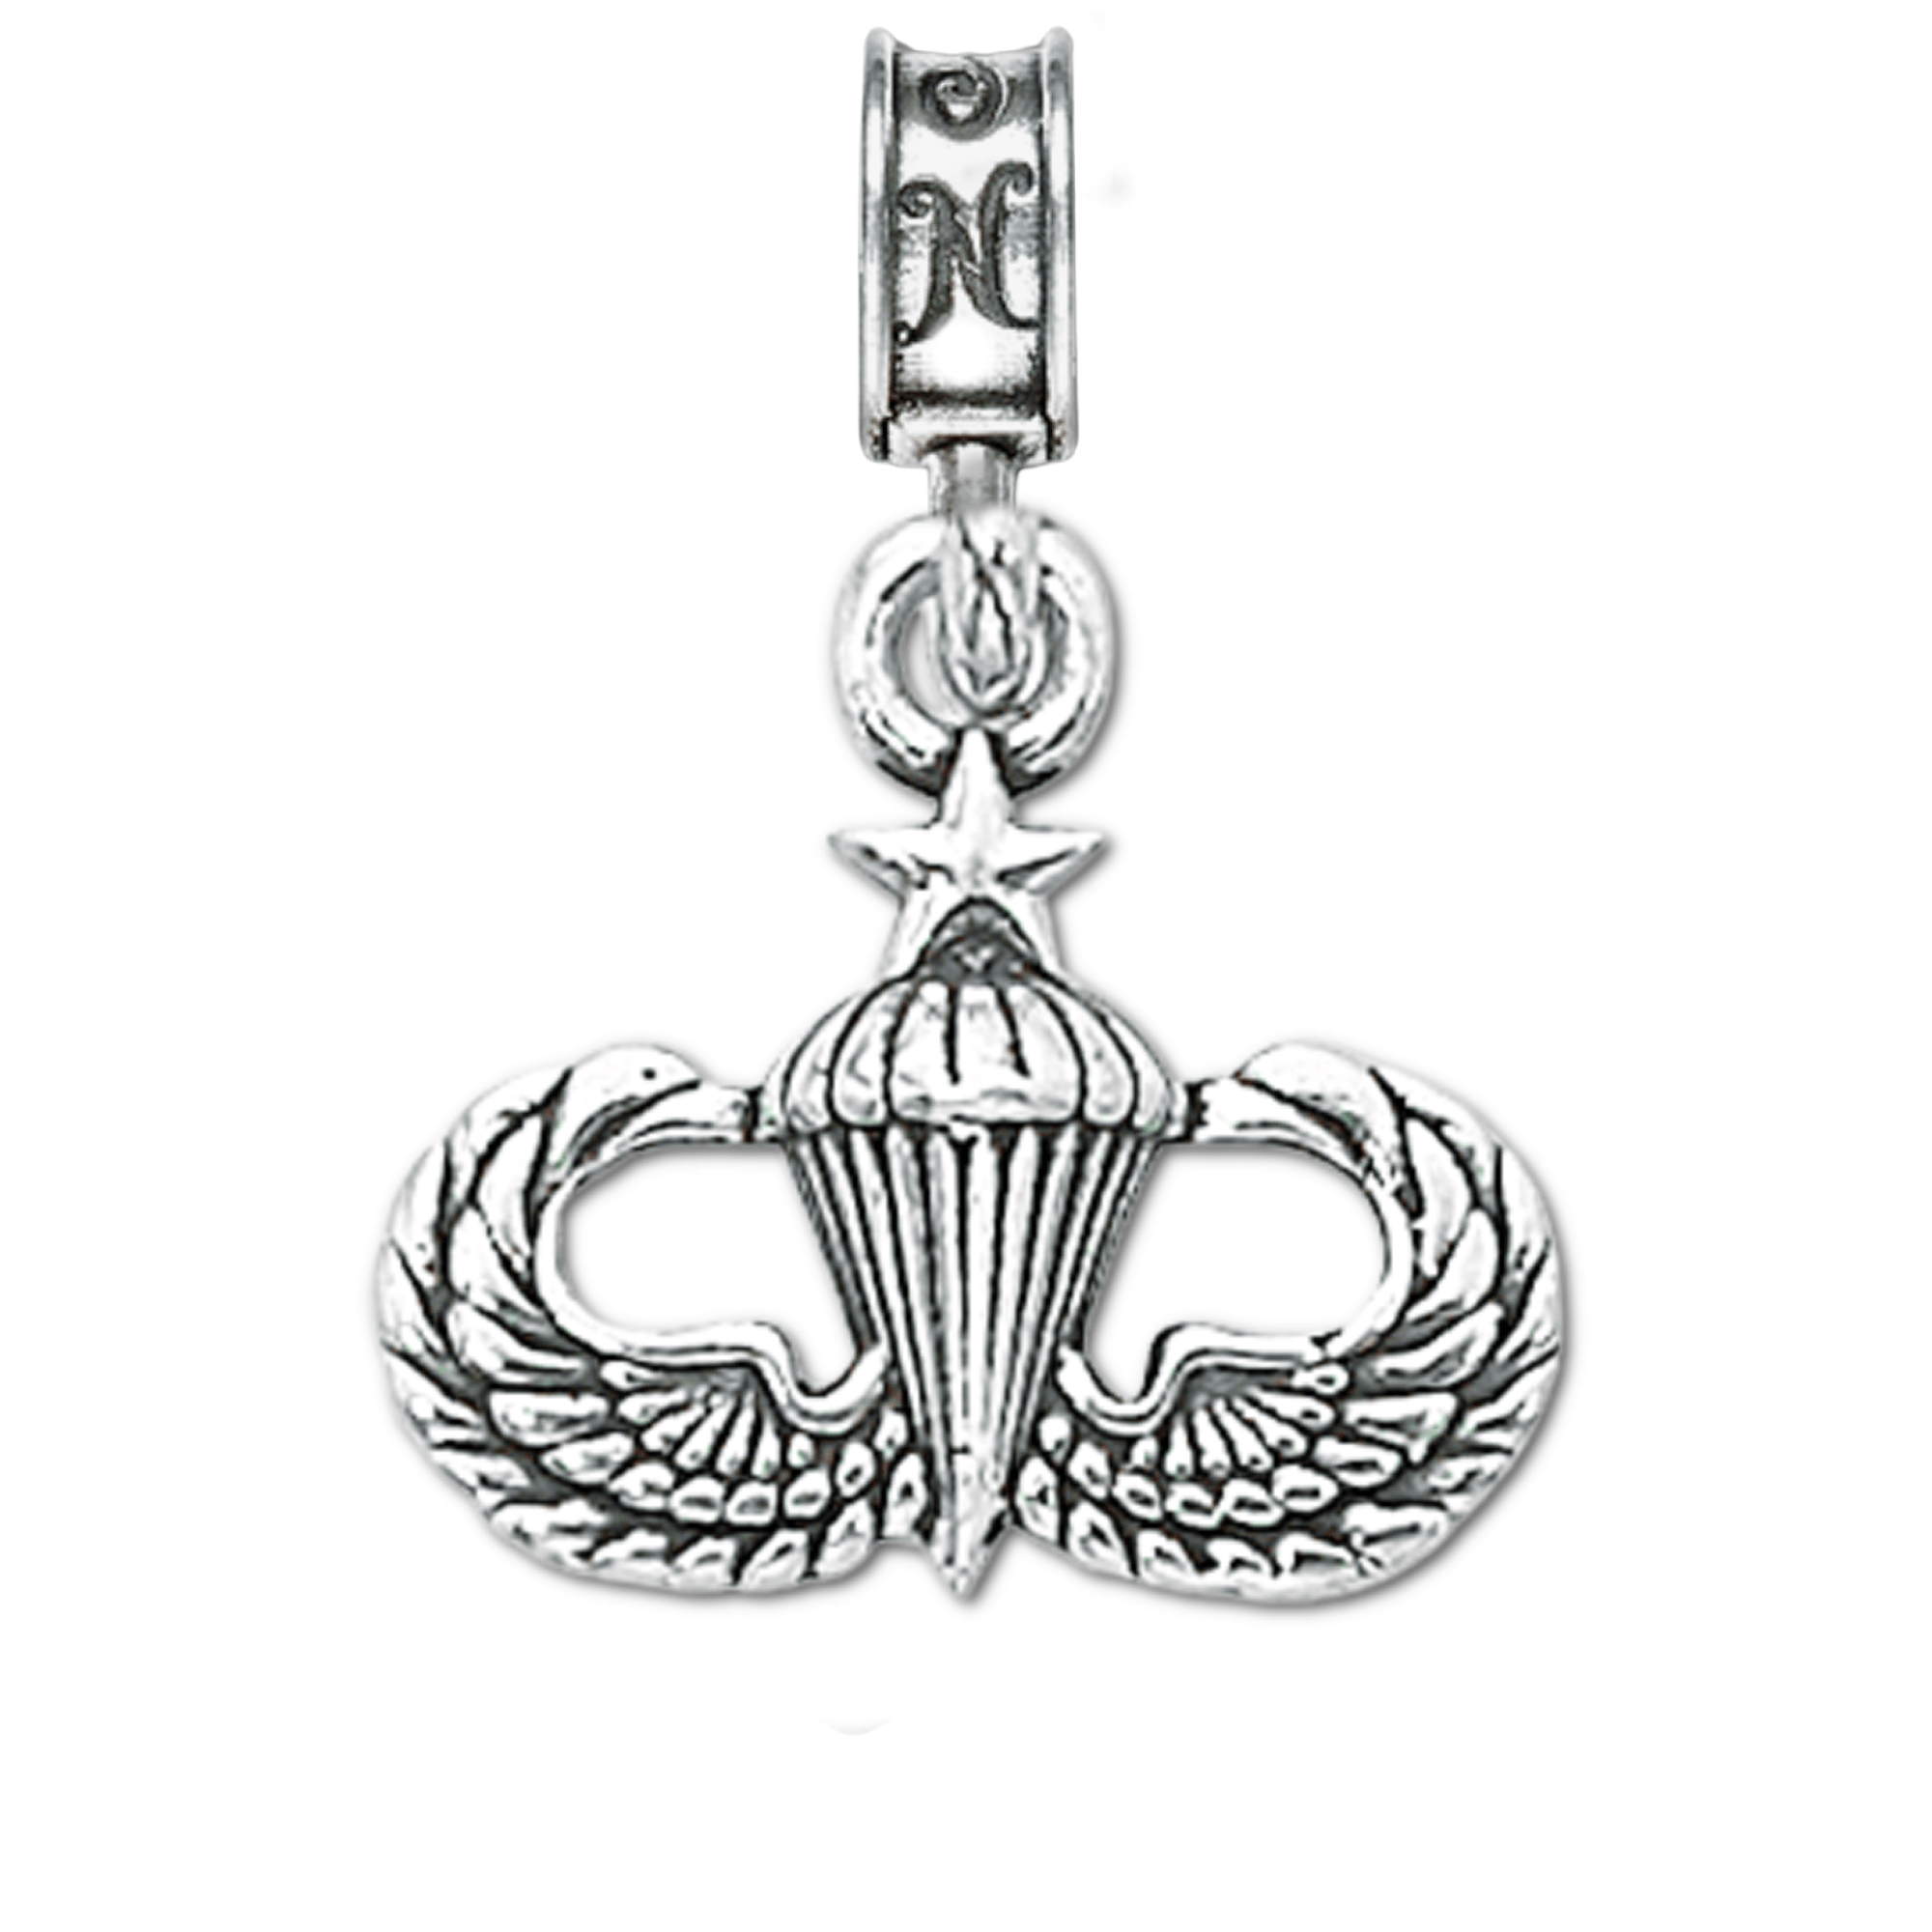 Military Jewelry, Military Charms, Military Gifts, Jump Wings Senior Charm